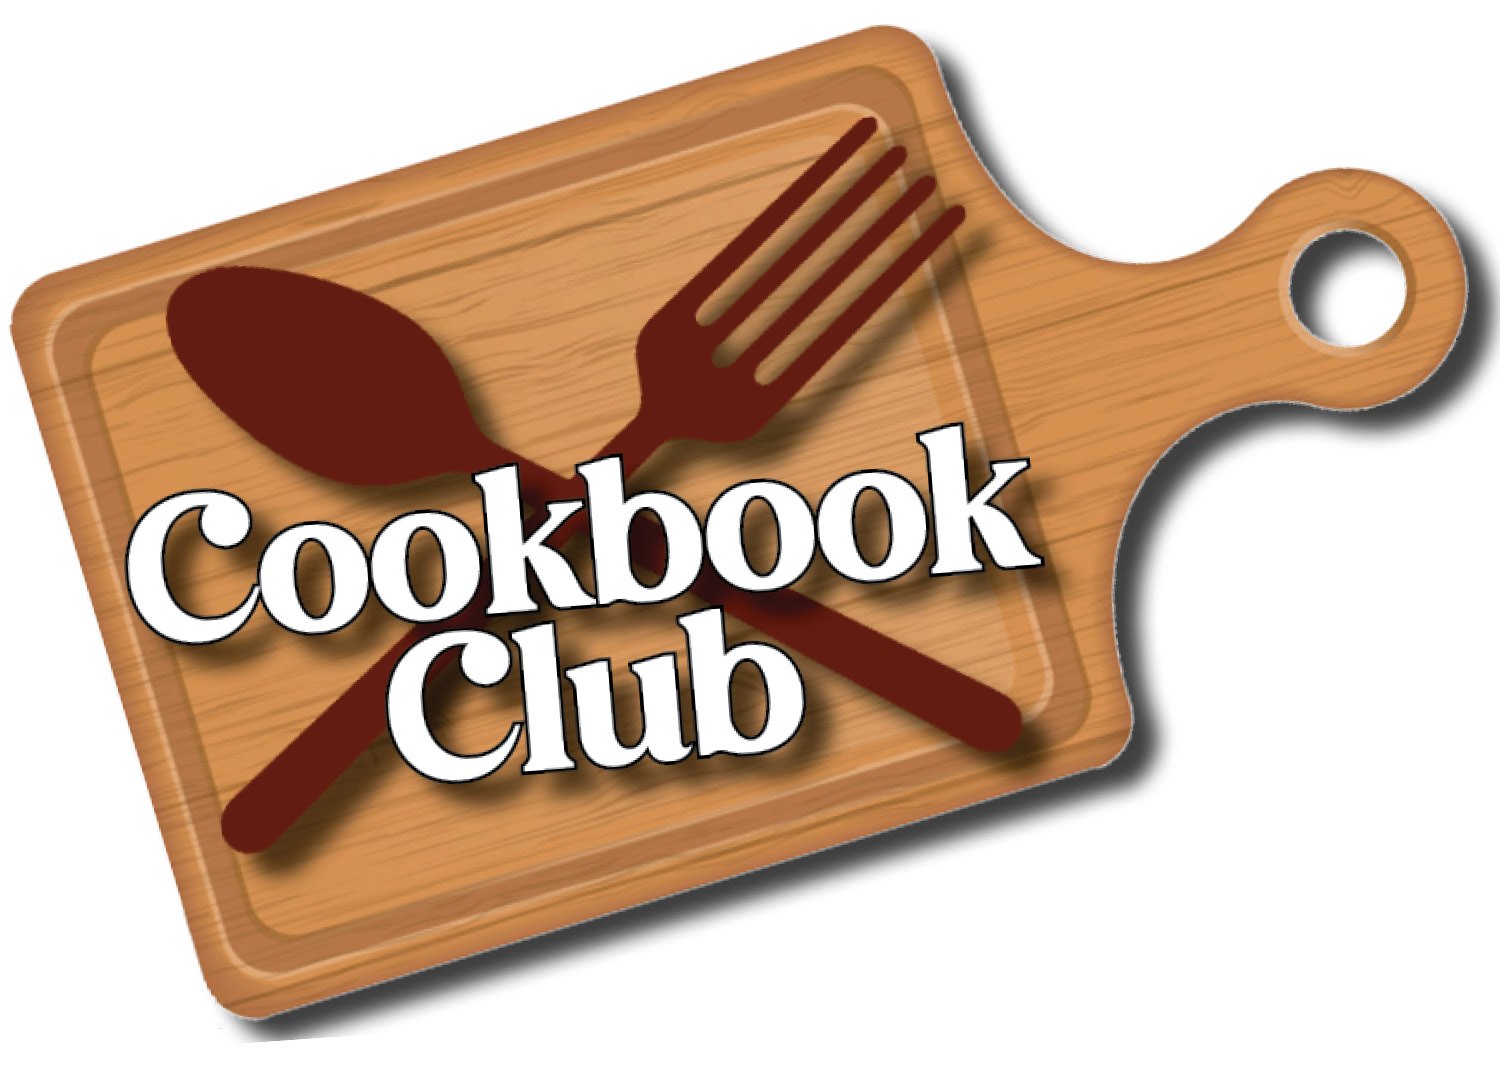 Cookbook Club logo - Join other food enthusiasts at Northland’s cookbook club! Home cooks of any skill level are welcome as we explore dishes from various cookbooks. Each month will have a theme, and you can make a dish to bring and share with the club while we discuss the recipes and cooking process!